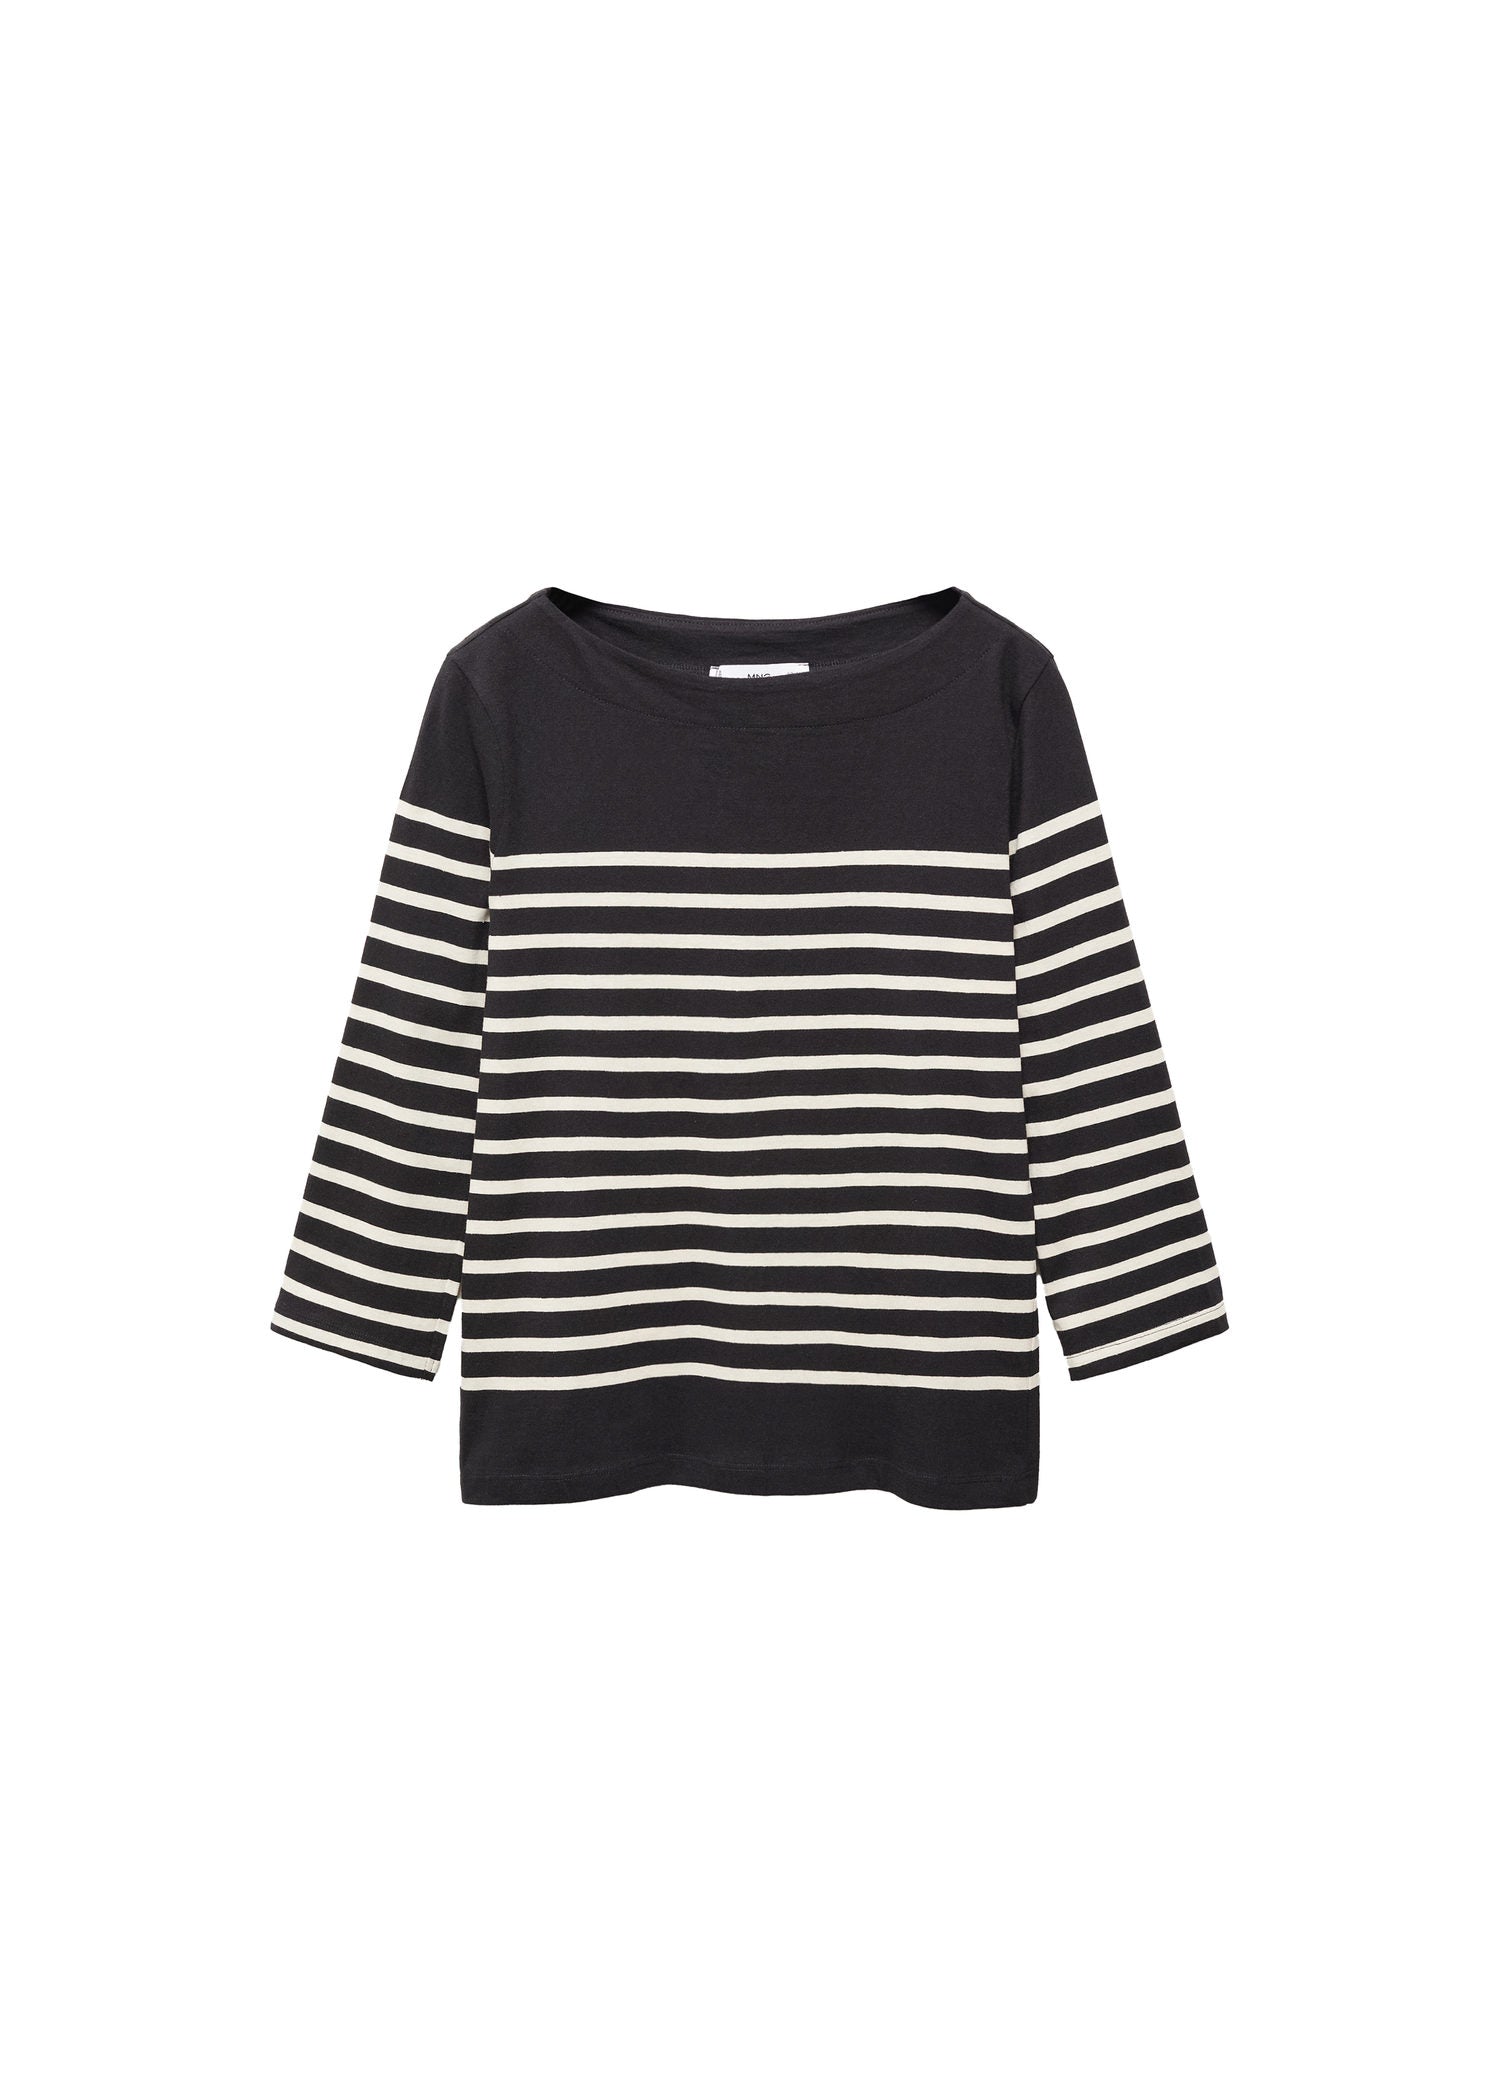 Mango Striped boat-neck T-shirt 4 Shaws Department Stores